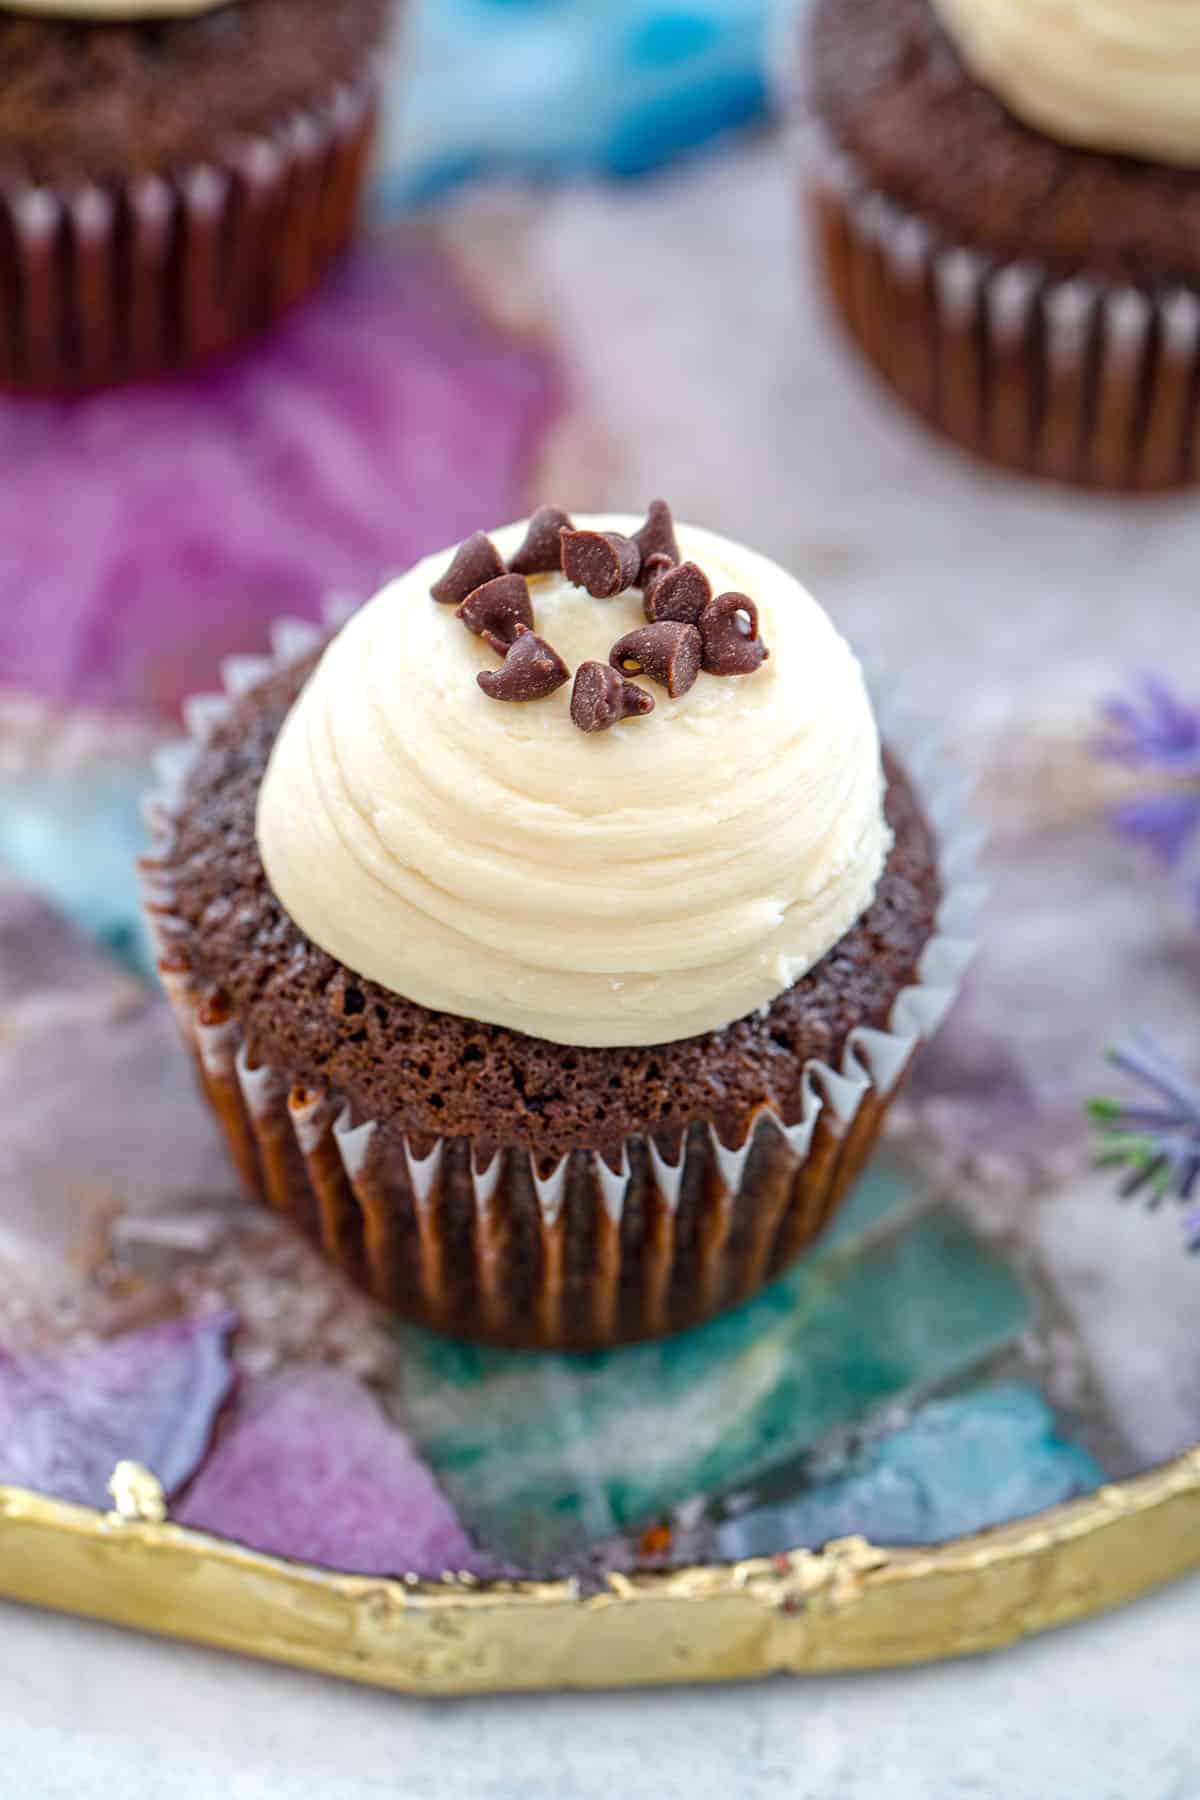 Overhead view of a mint chocolate cupcake topped with Baileys frosting and chocolate chips.